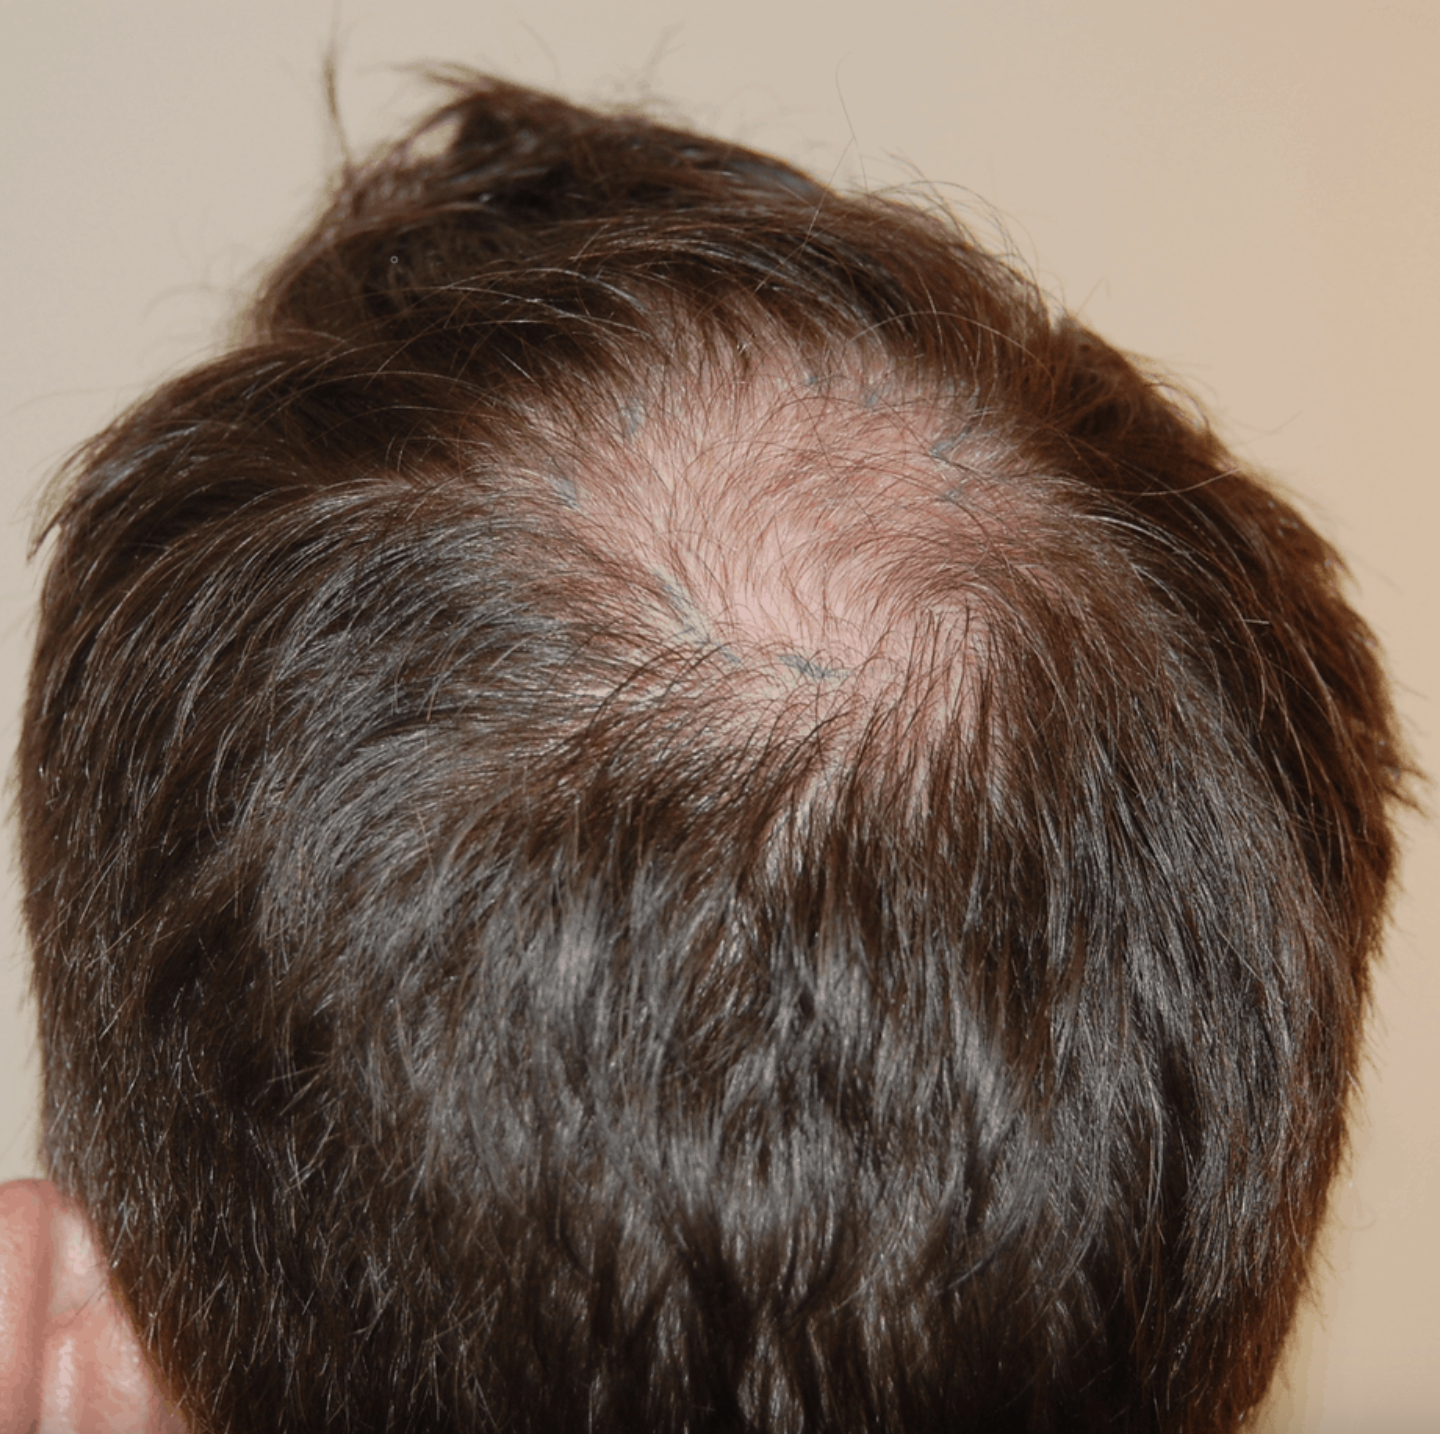 patient with norwood 3a stage balding